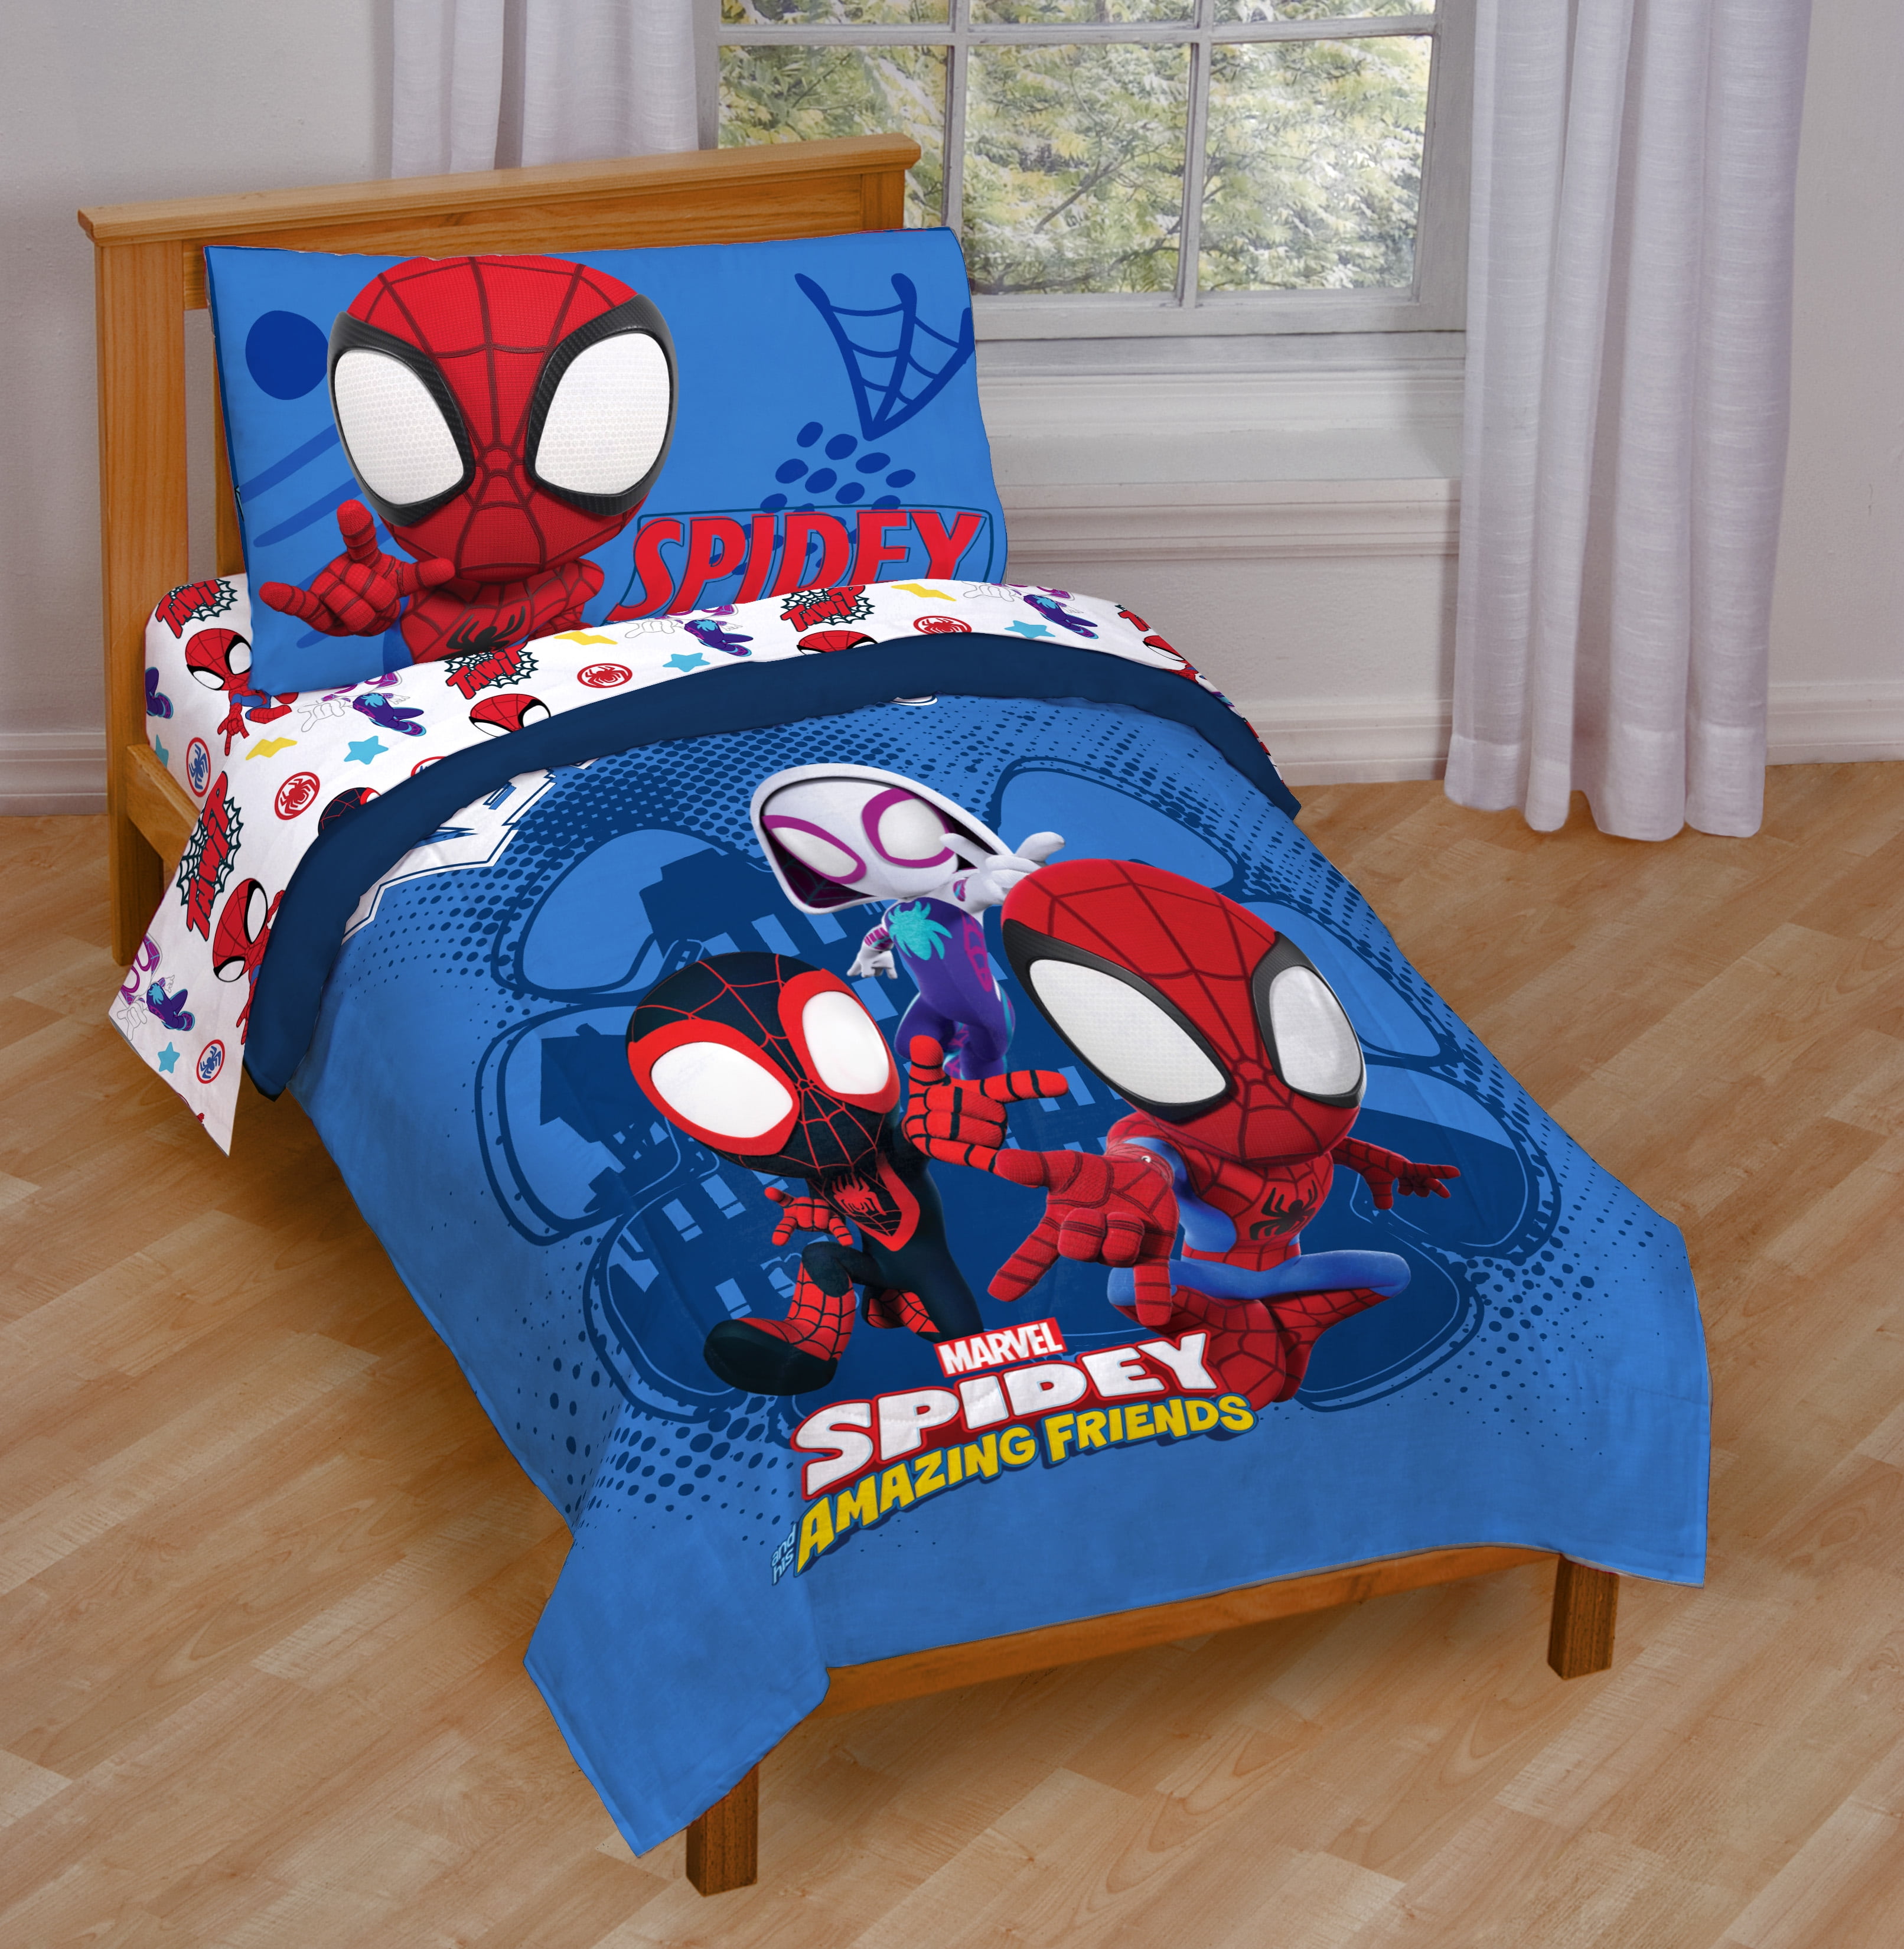 Marvel Amazing Spider-Man Single Bed Quilt/Comforter Cover Set NWT FREE SHIPPING 